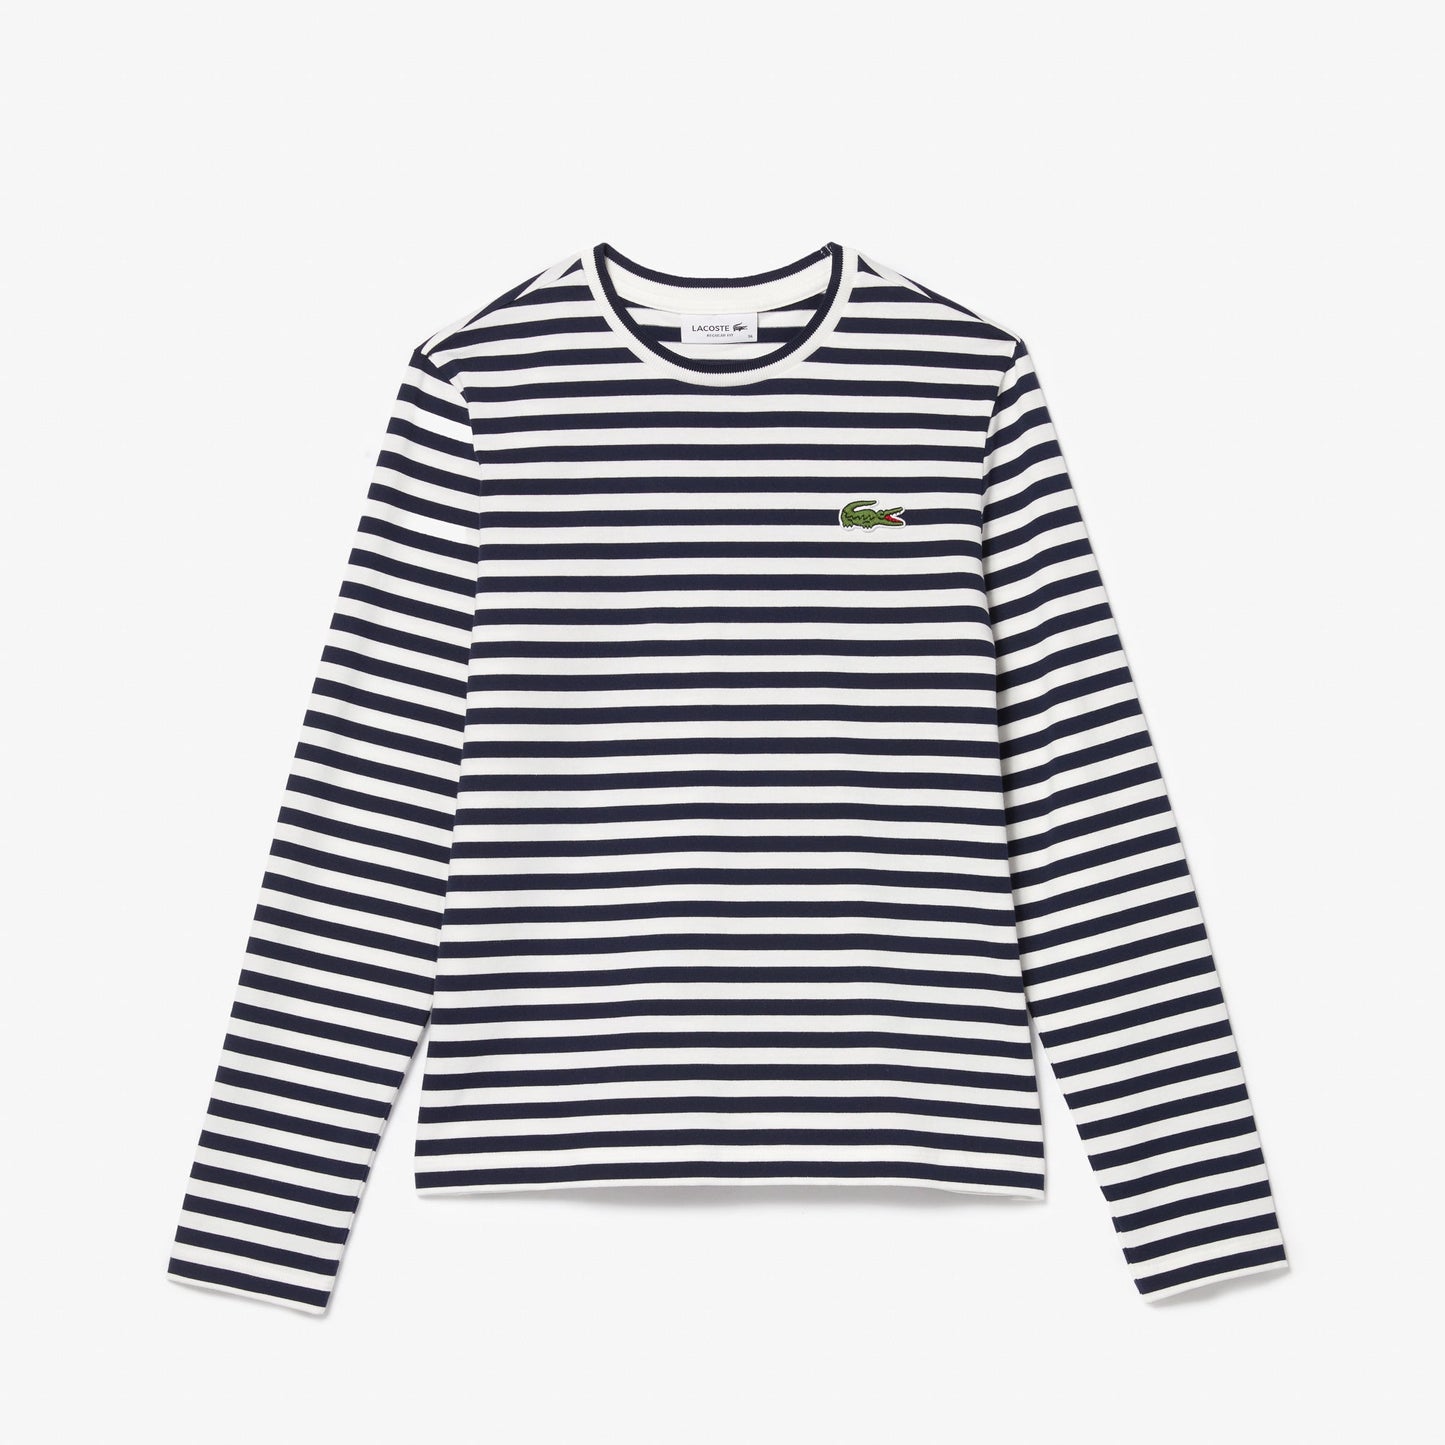 Shop The Latest Collection Of Lacoste Women'S Striped Jersey Cotton T-Shirt - Tf9207 In Lebanon